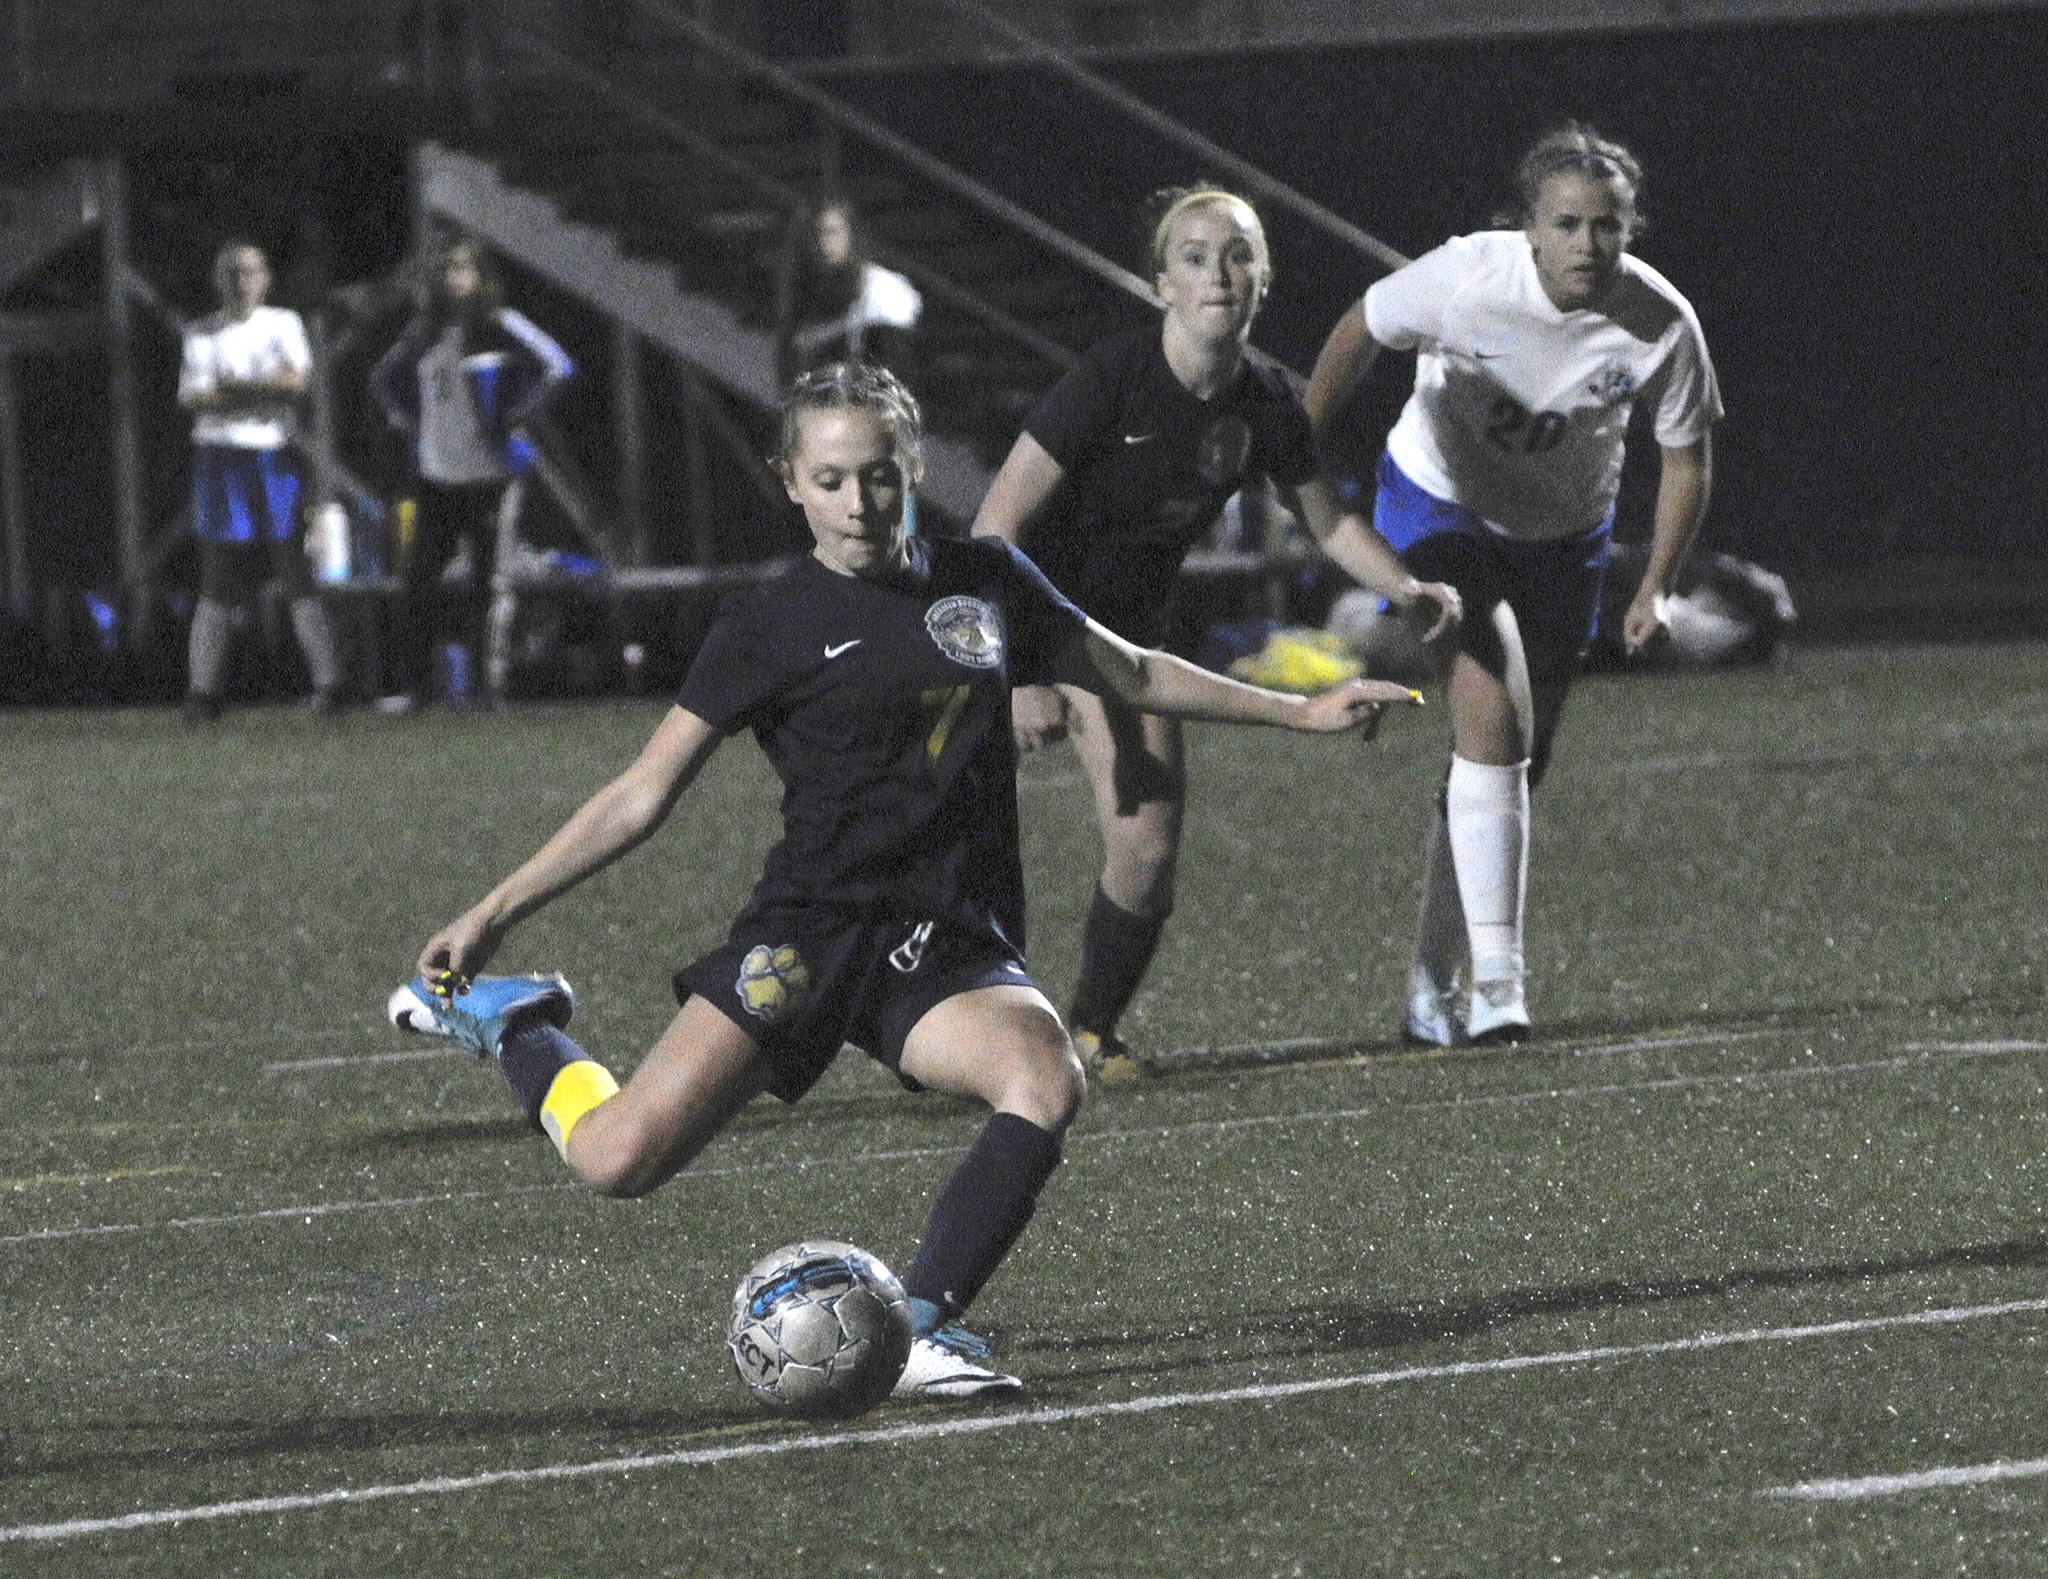 Aberdeen’s Emma Green scores on a penalty kick Tuesday against Elma at Stewart Field. (Hasani Grayson | The Daily World)